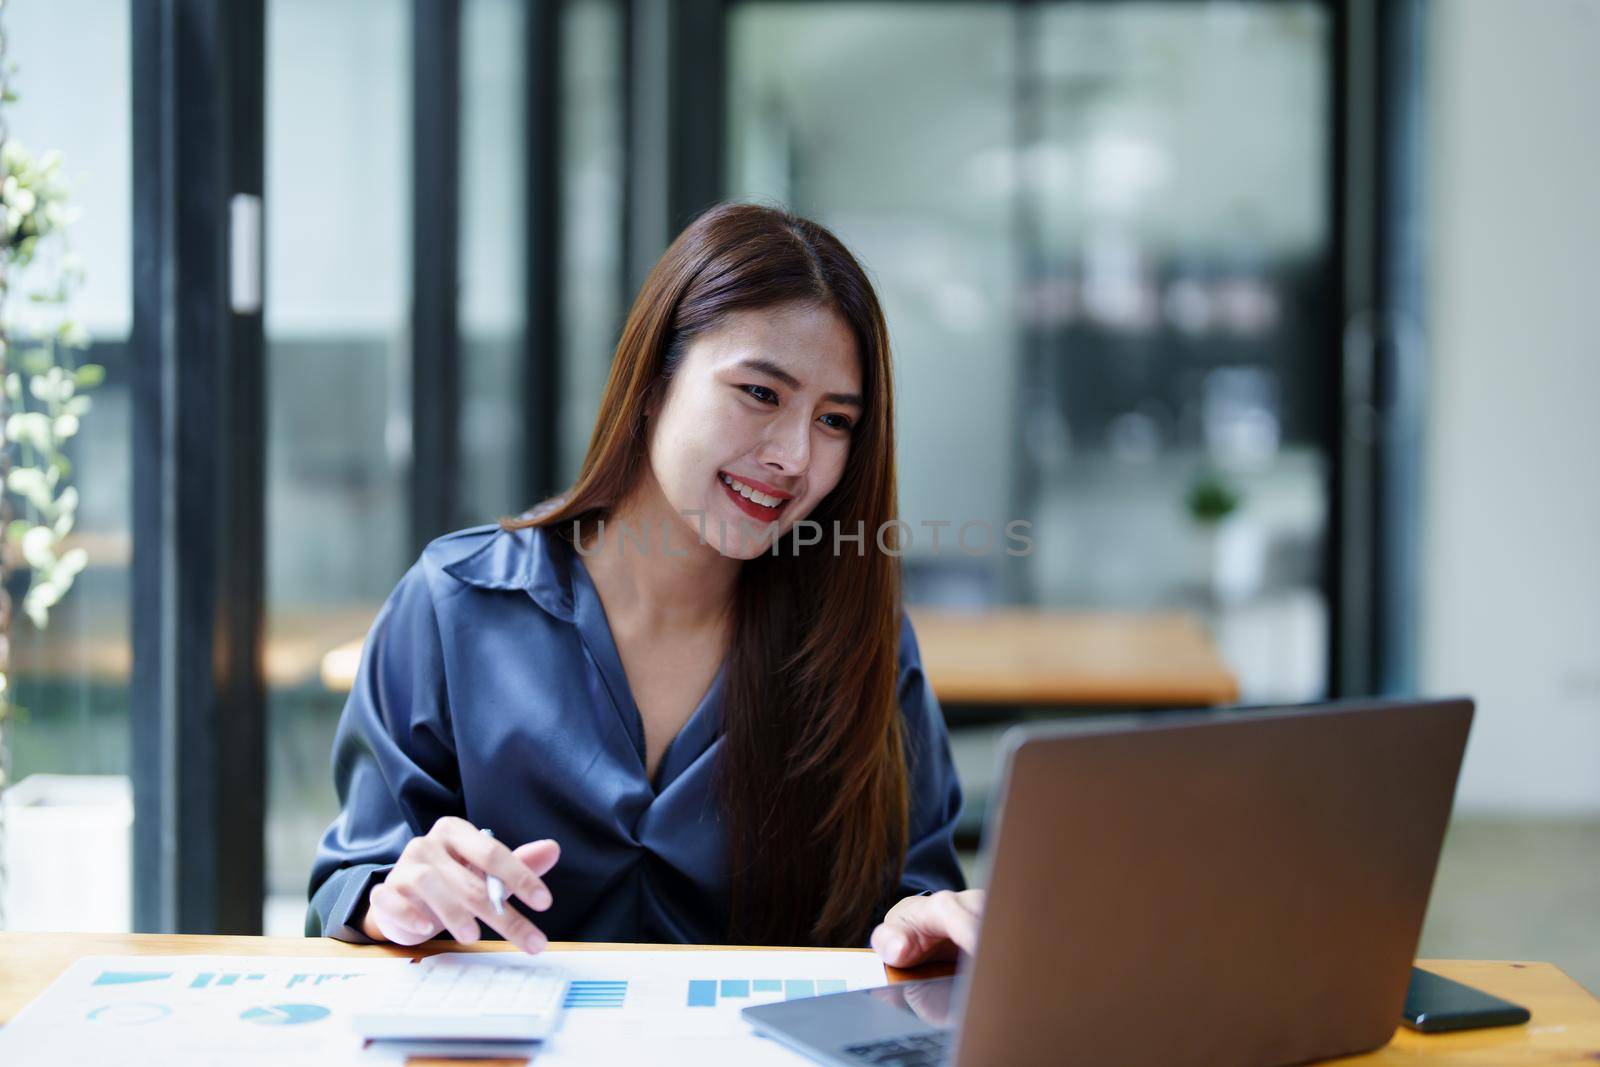 Portrait of an Asian female employee using computer with a smiling face as she works the next morning.